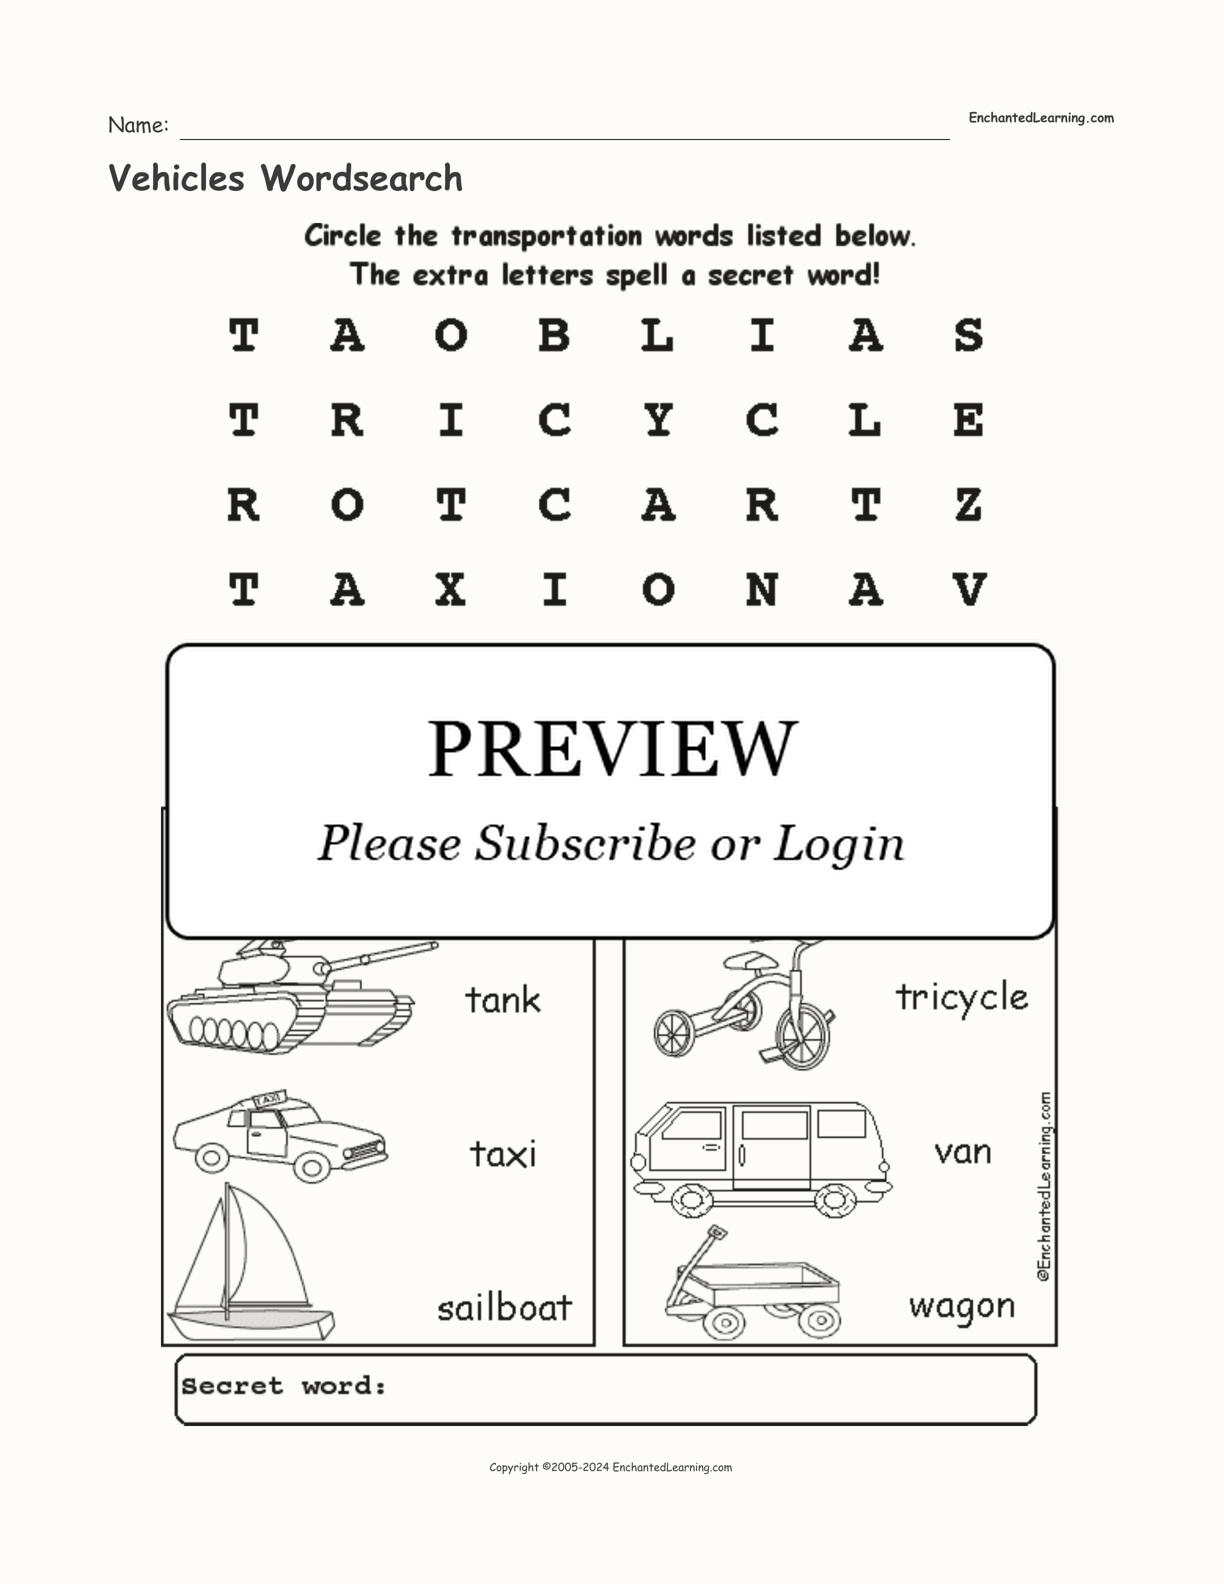 Vehicles Wordsearch interactive worksheet page 1